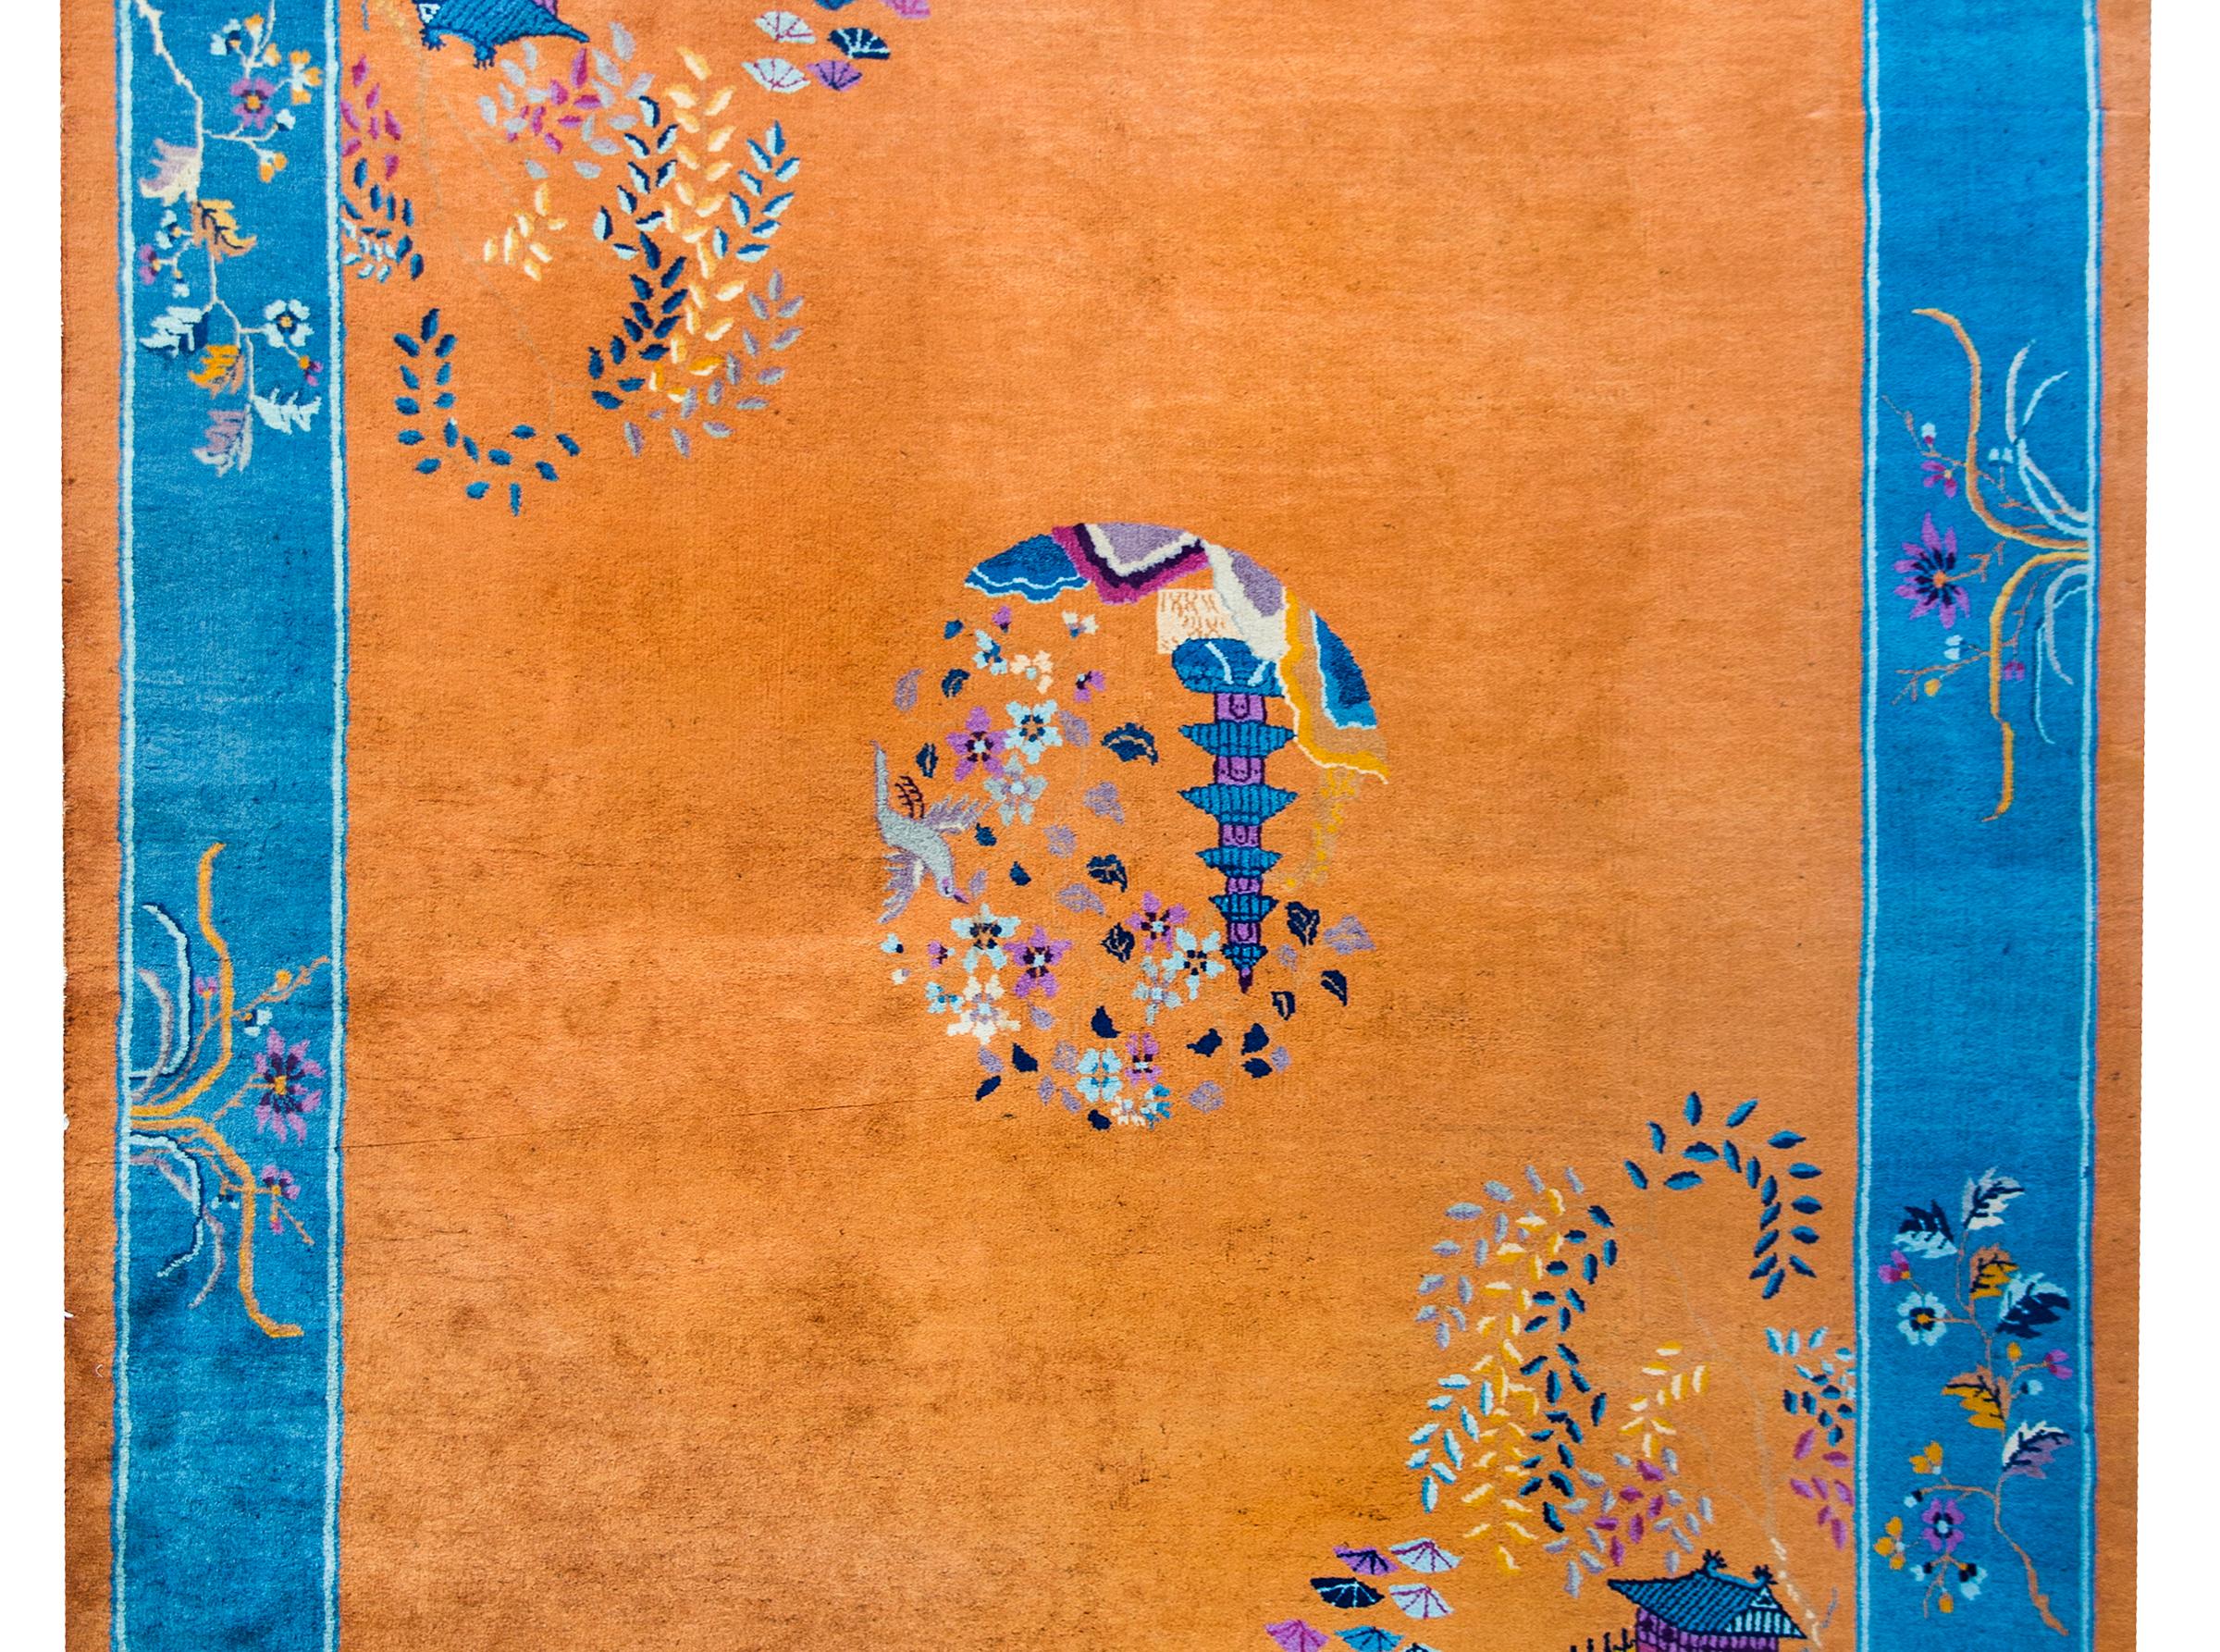 A beautiful early 20th century Chinese Art Deco rug with a dark golden orange field with a central pagoda medallion, garden pavilions in opposite corners, and surrounded by a wide indigo border overlaid with peonies, chrysanthemum, and other